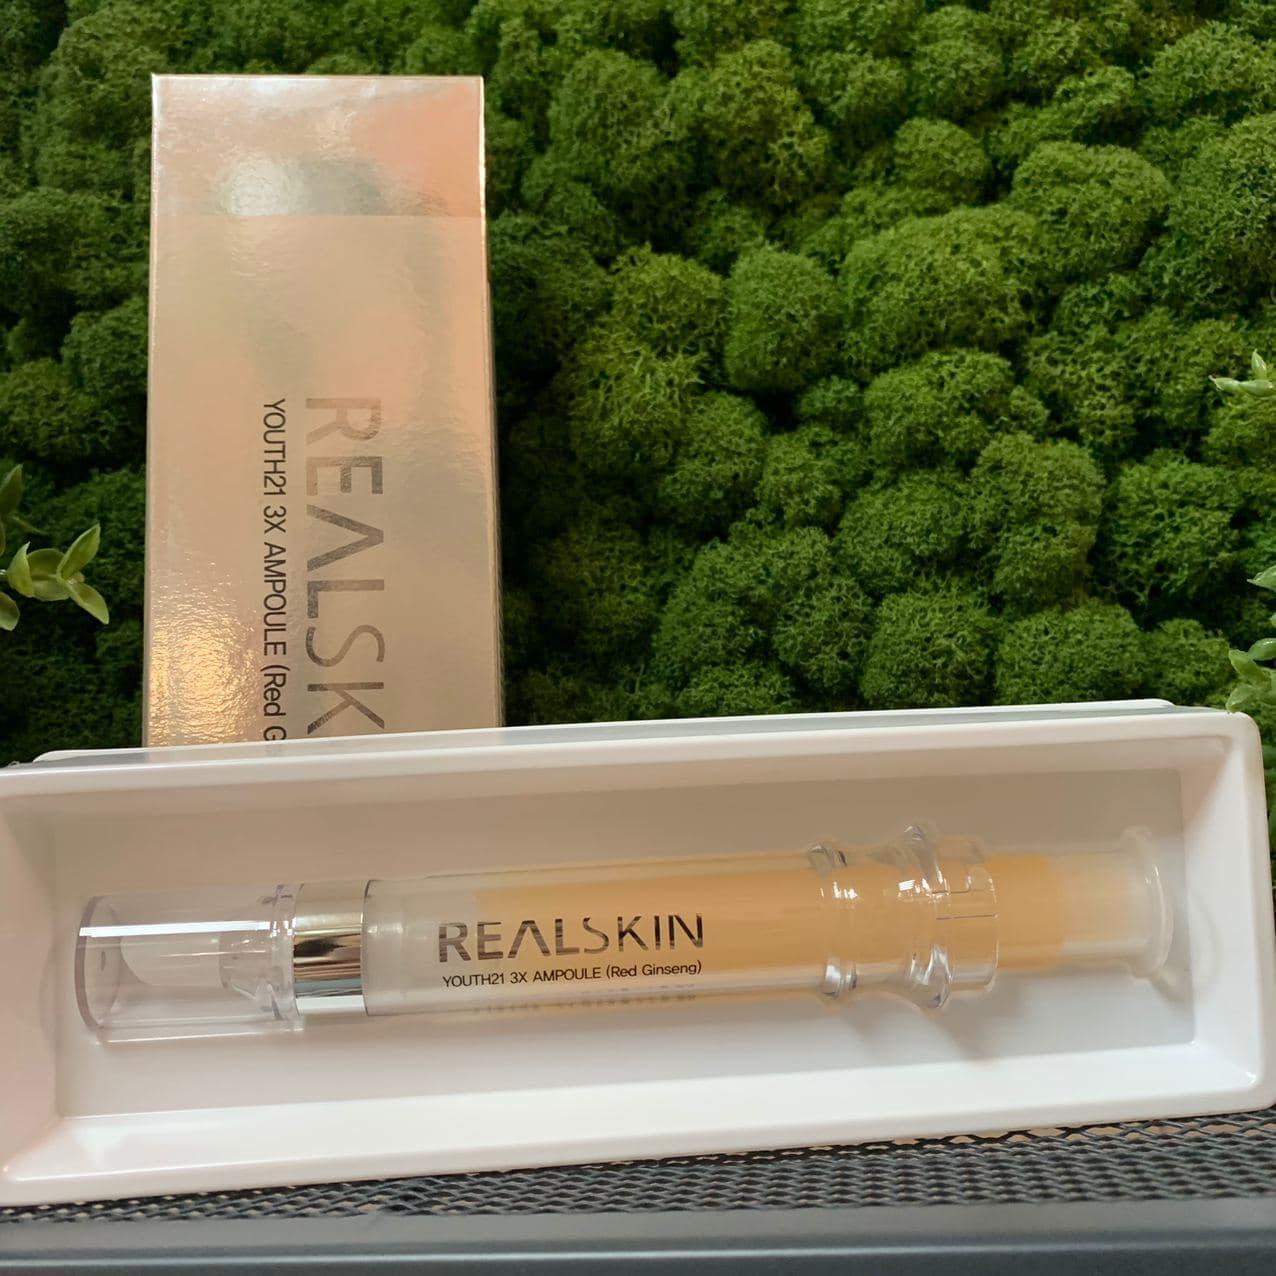 Сыворотка для лица REALSKIN Youth21 3X Ampoule (Red ginseng), 12 мл.